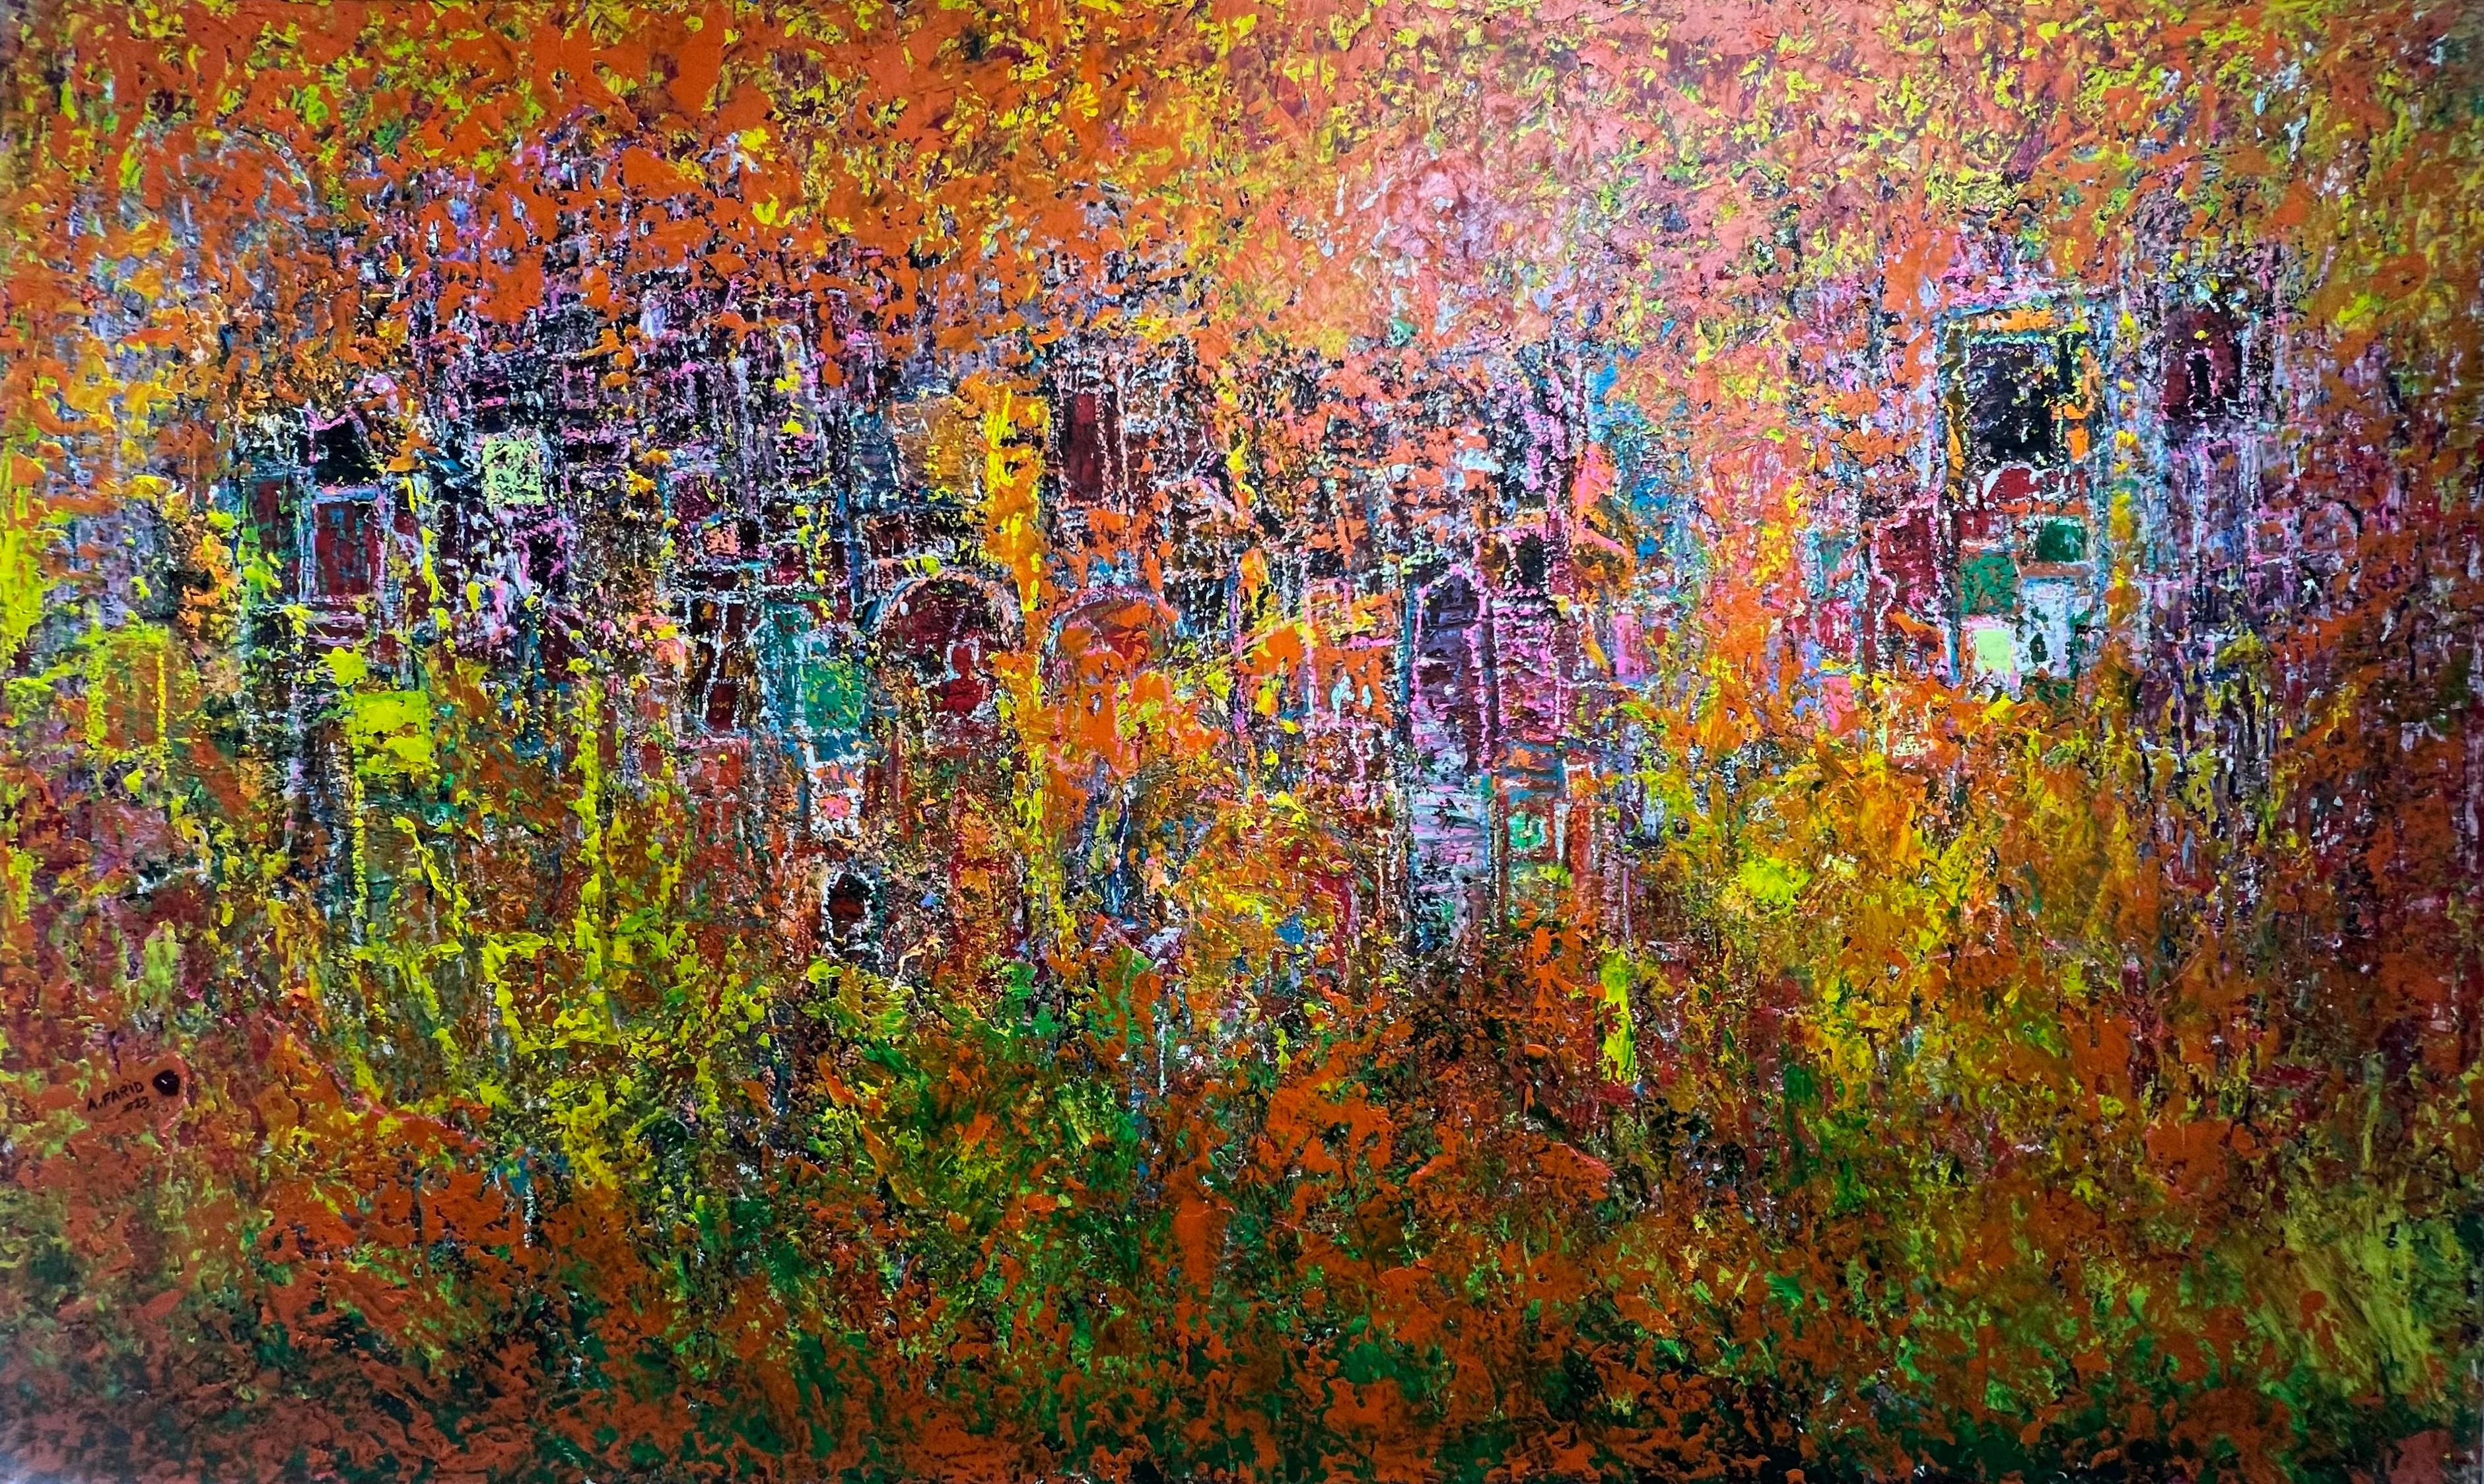 "Glory" Abstract Mixed Media Painting 47" x 79" inch by Ahmed Farid

mixed media on canvas

Born in Cairo, Egypt, in 1950 where he currently lives and works, Farid is an autodidact Egyptian painters who trained privately in immersion apprenticeship